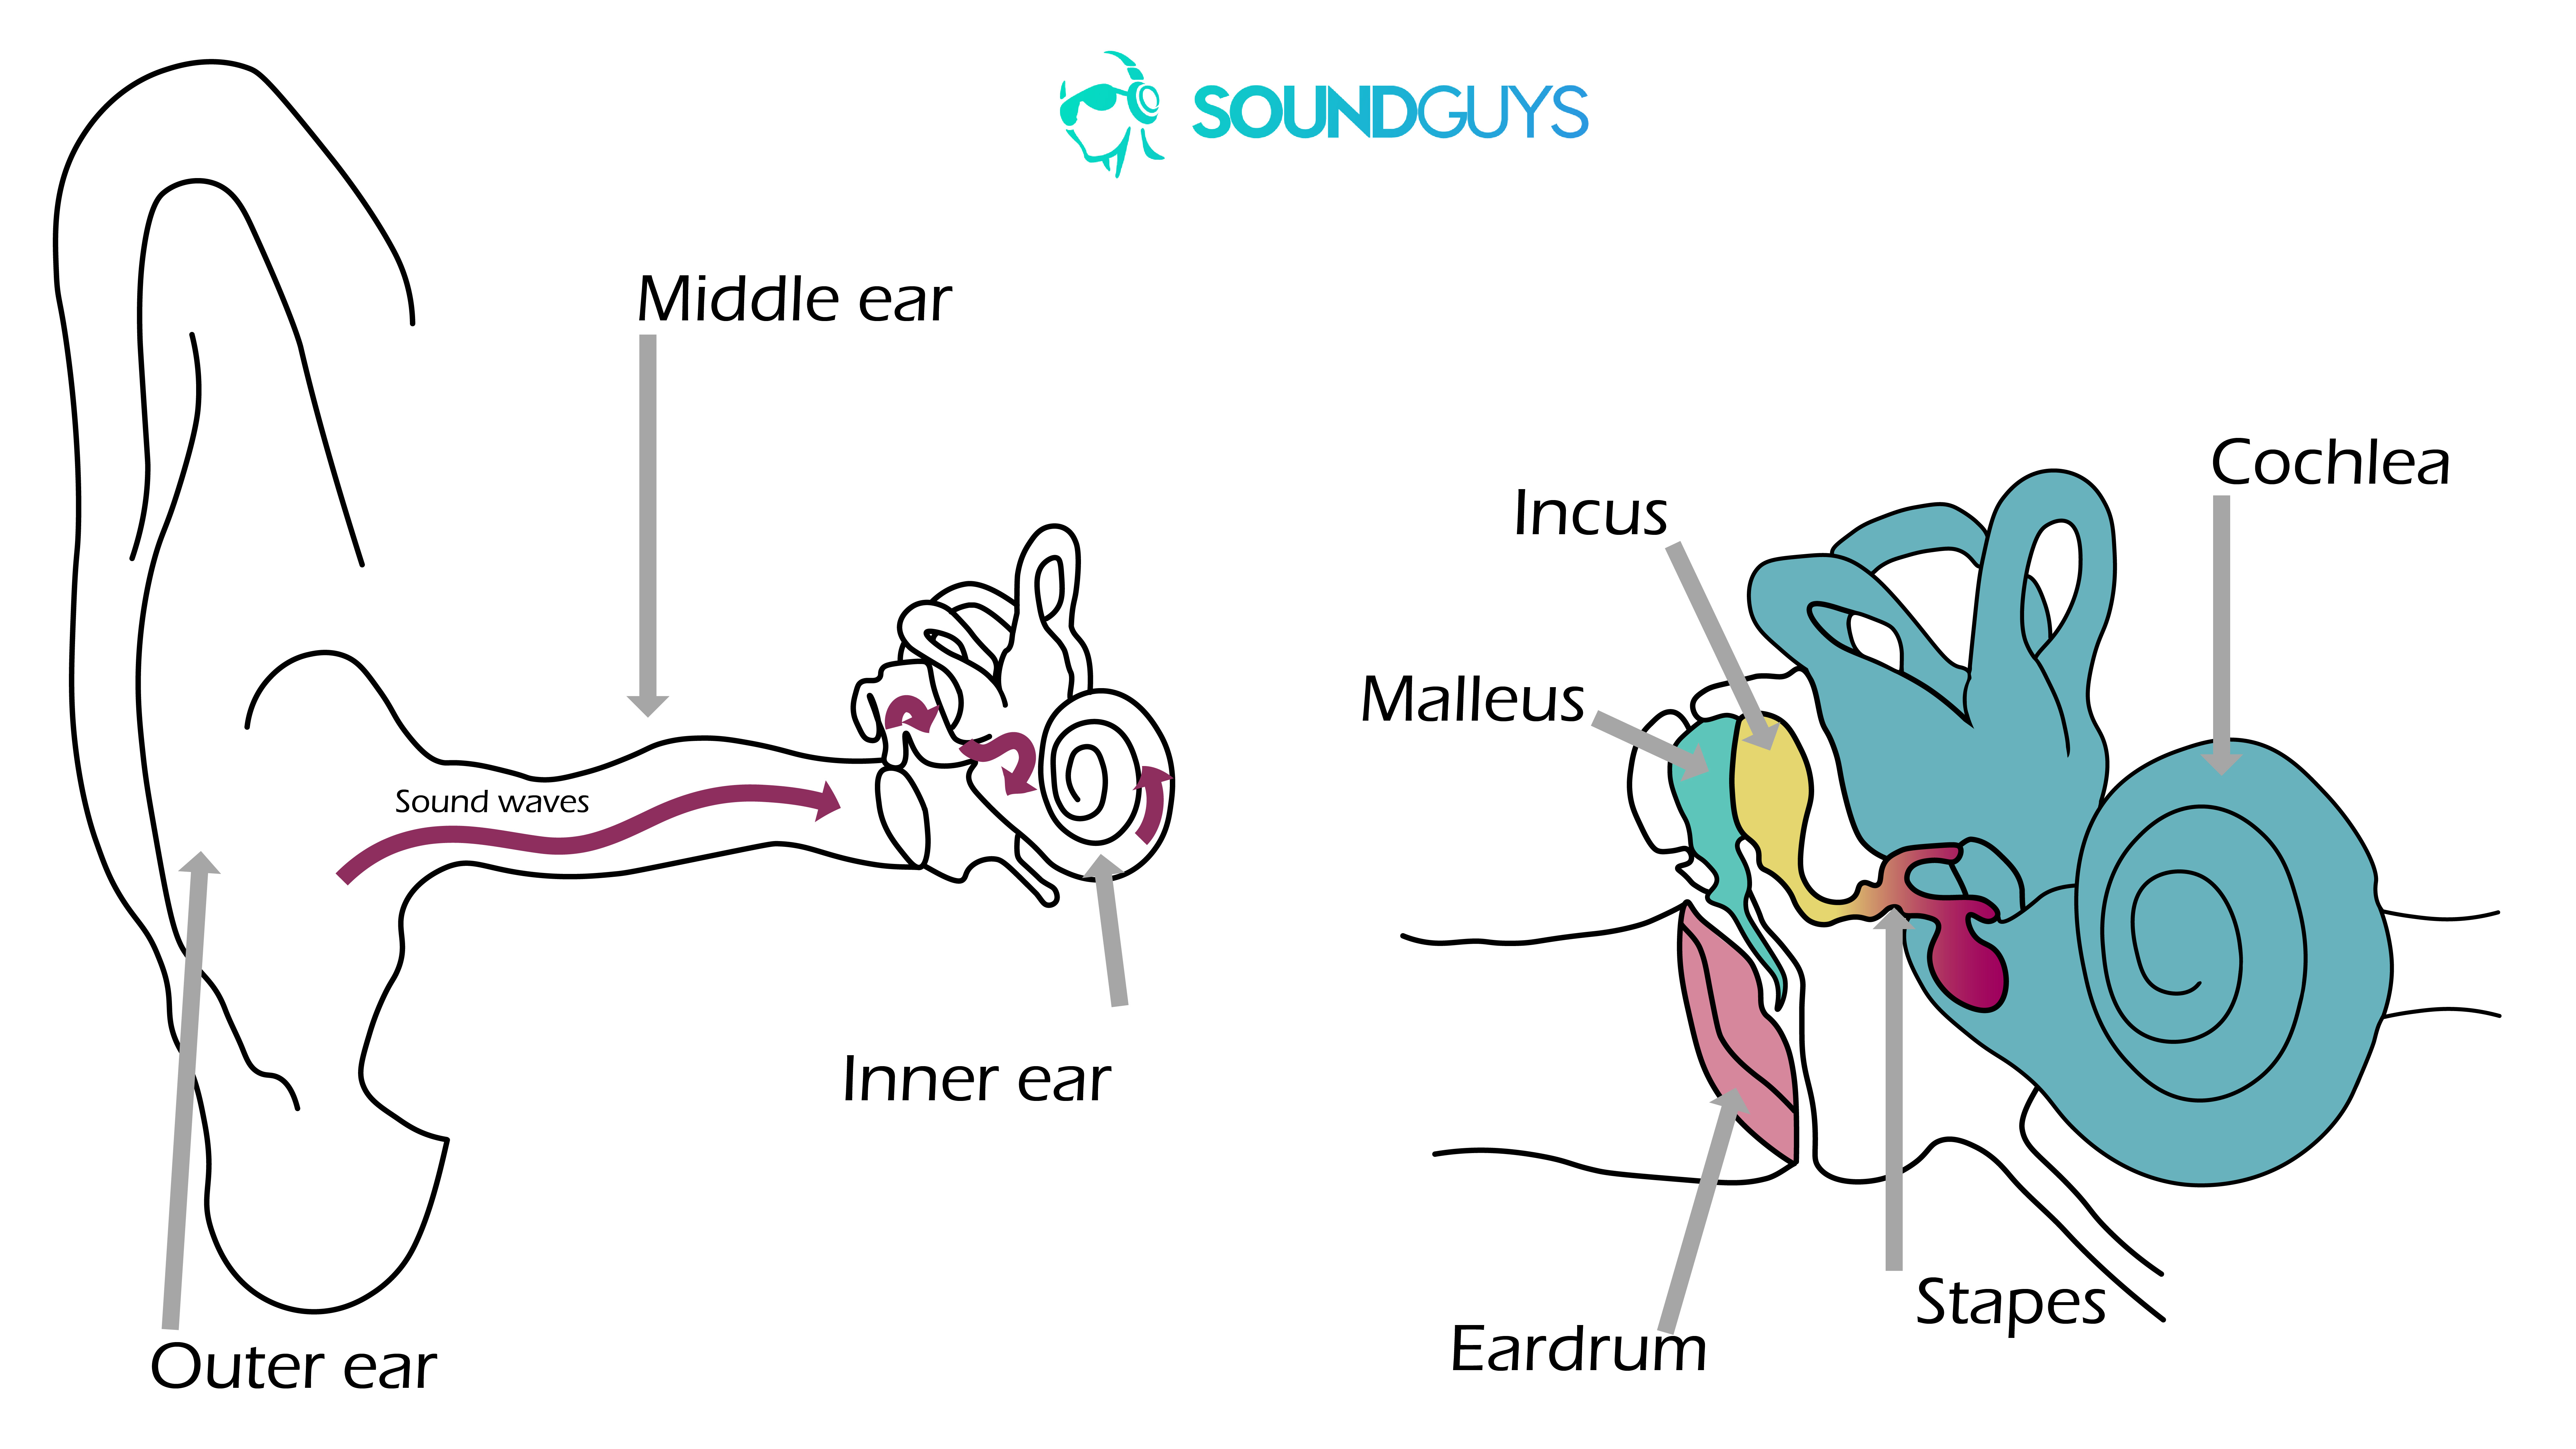 Bone conduction headphones - Noise-induced hearing loss: Two diagrams. The one on the left shows how sound travels into the ear and the right is a close-up fo the middle and inner ears.